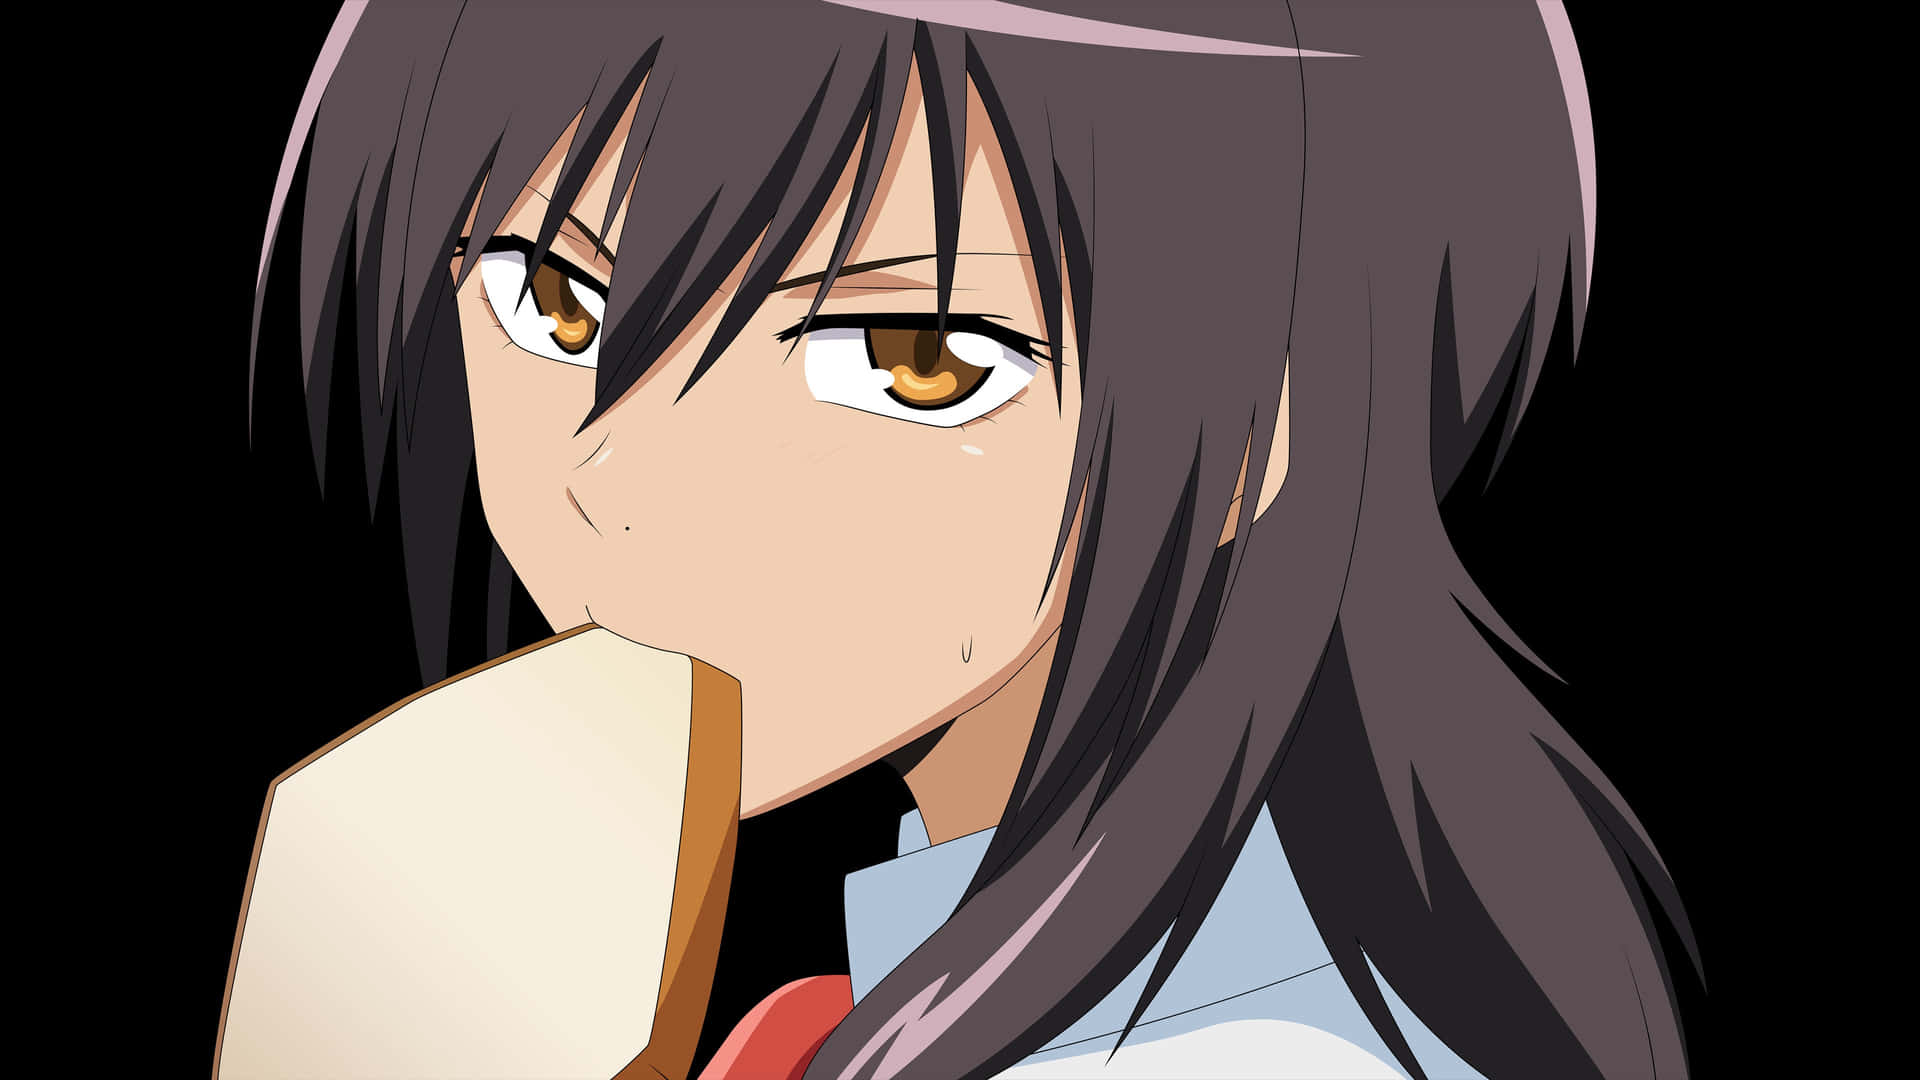 A Girl With Long Hair Is Eating A Piece Of Bread